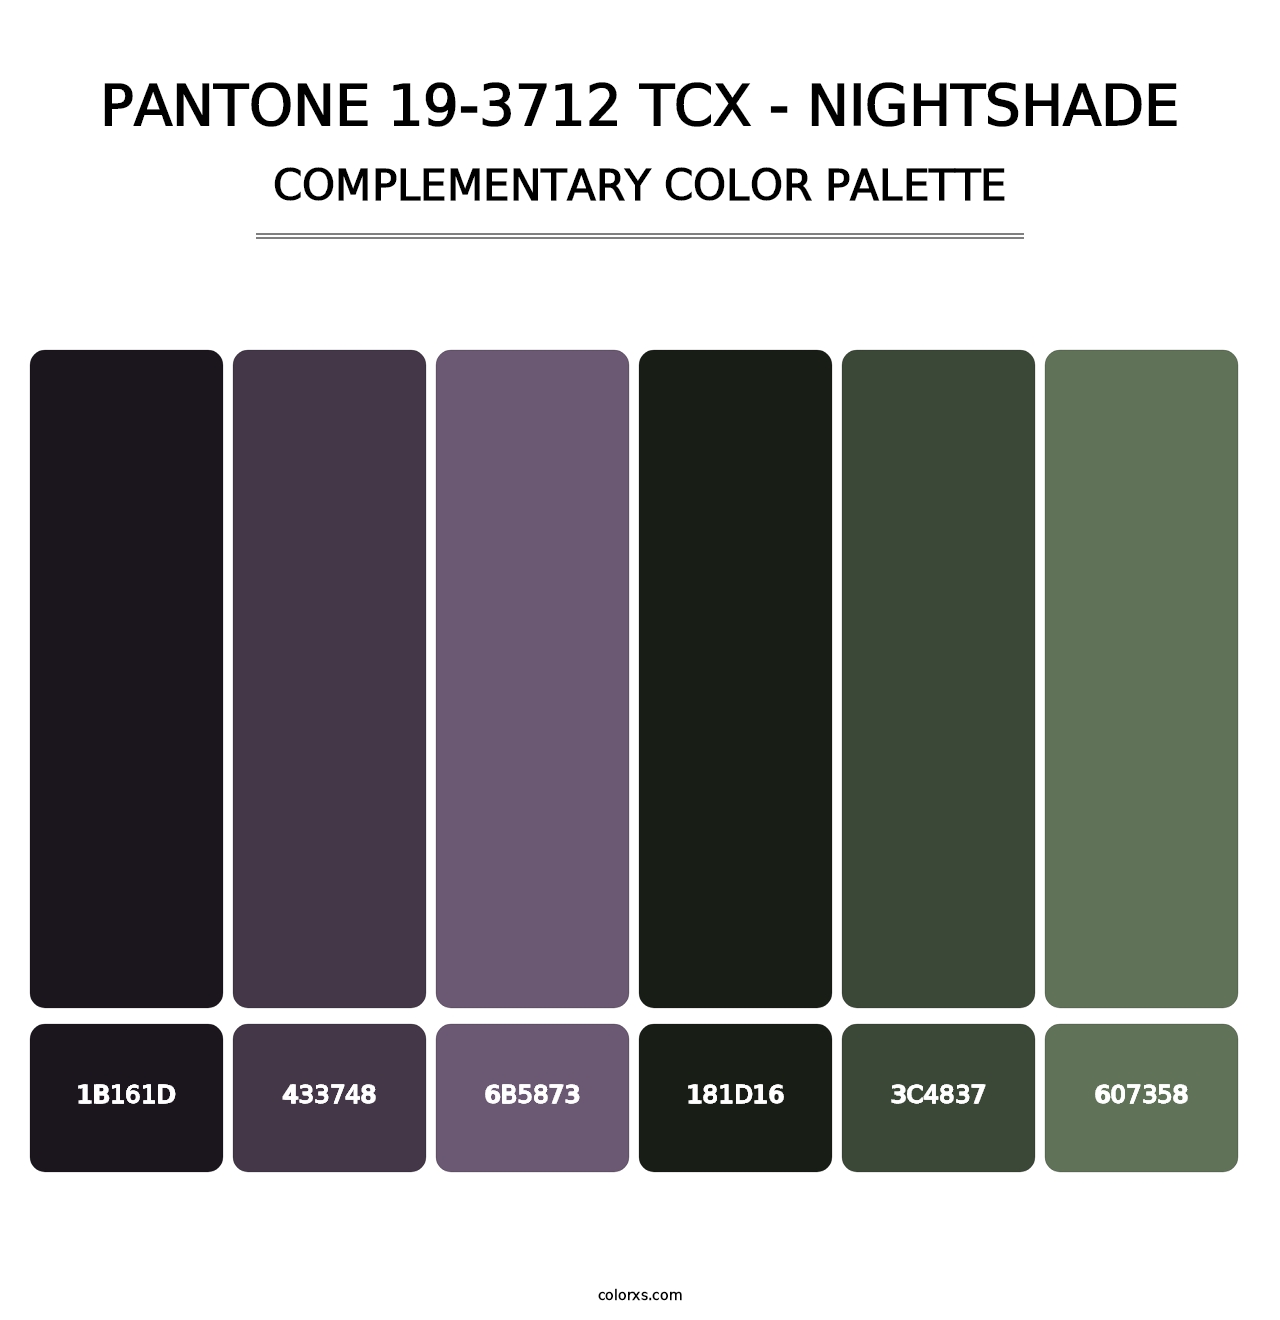 PANTONE 19-3712 TCX - Nightshade - Complementary Color Palette